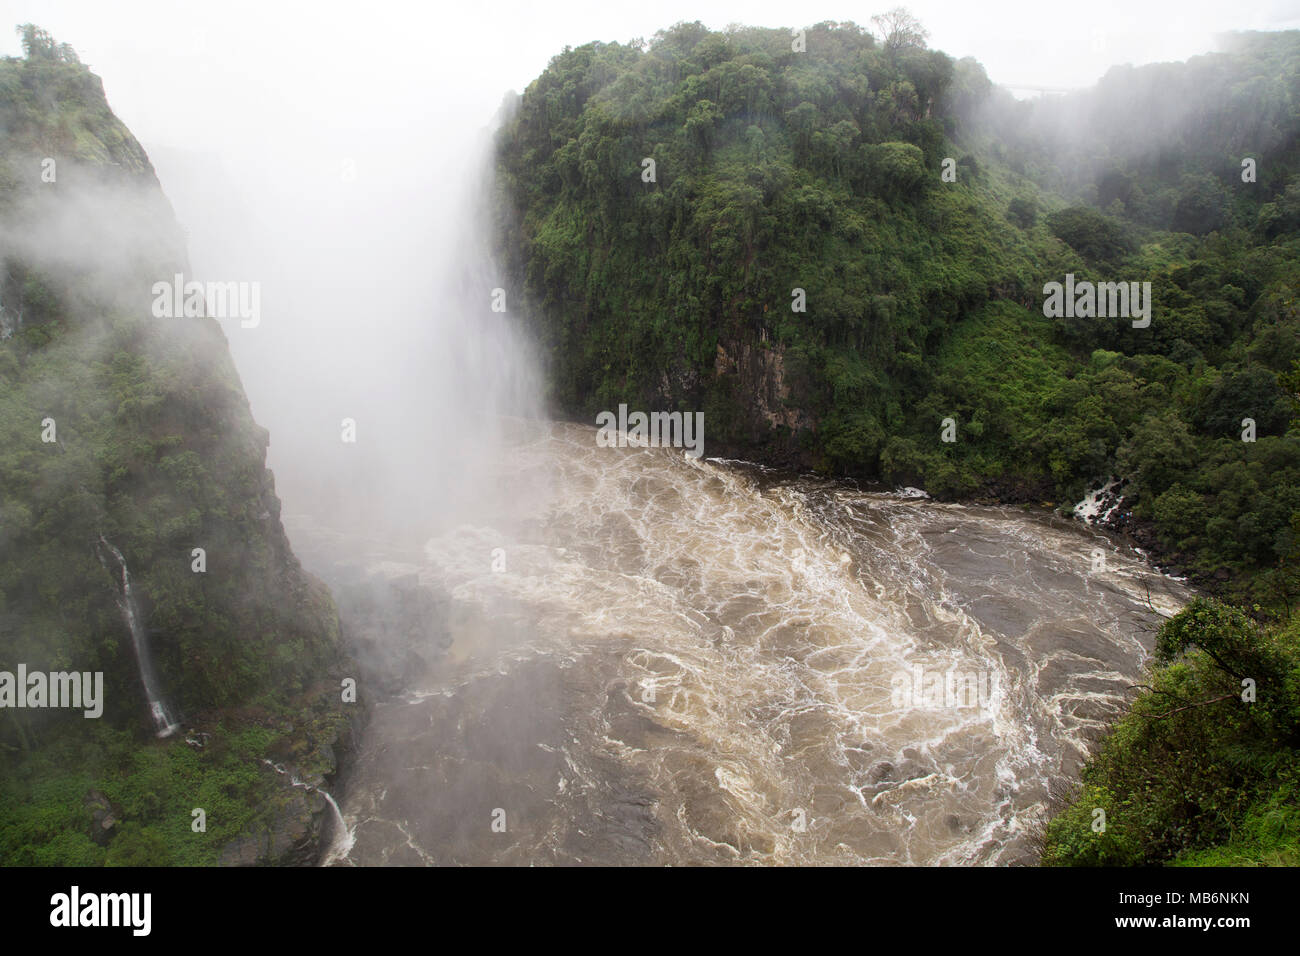 Misty spray caused by the Victoria Falls on the border of Zimbabwe and Zambia. The swirling water of the River Zambezi flows in the gorge. Stock Photo